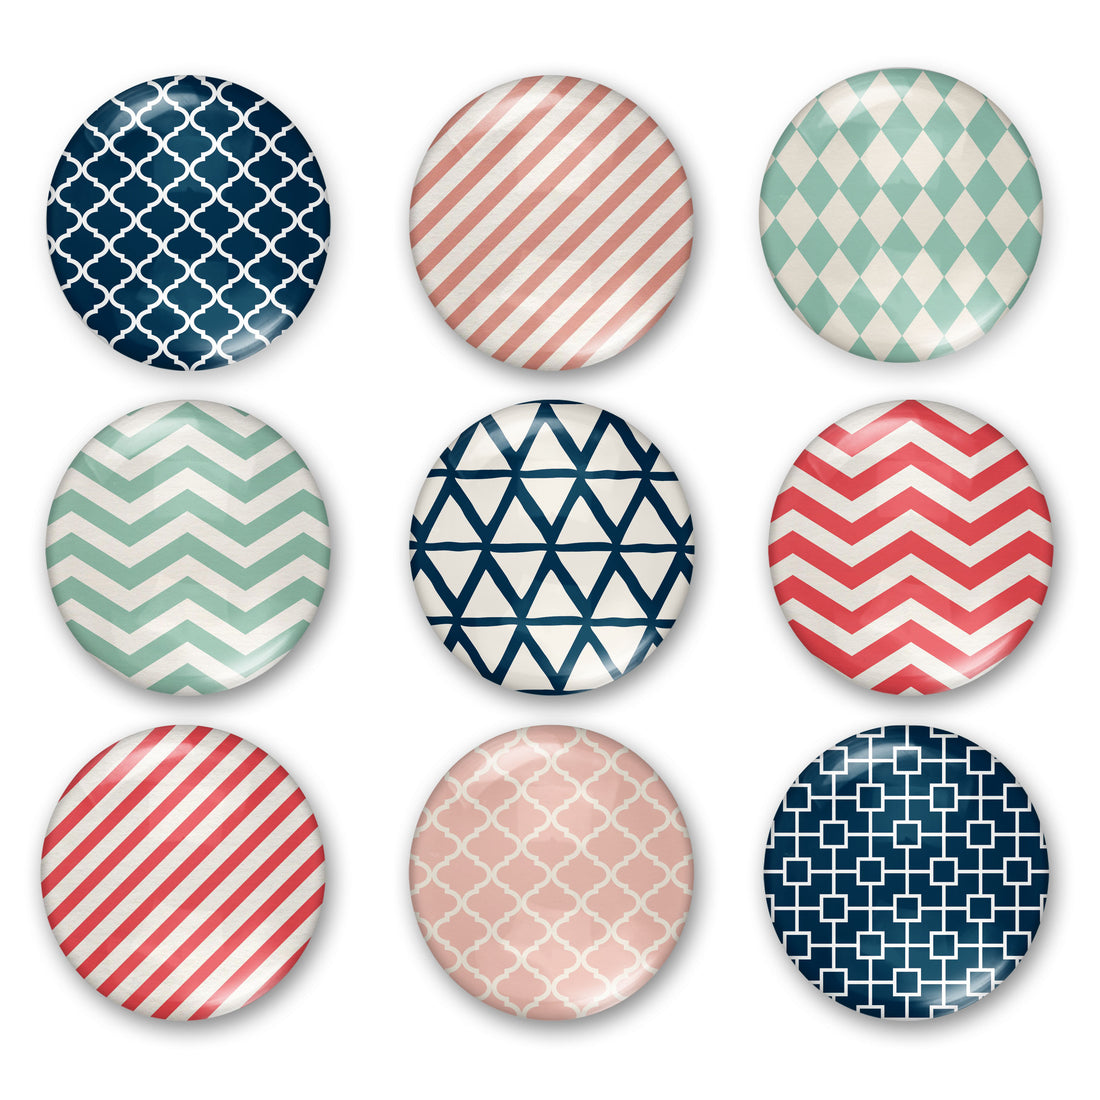 Cabochon Collage Sheet - Geometries - Printable round image in 7 sizes